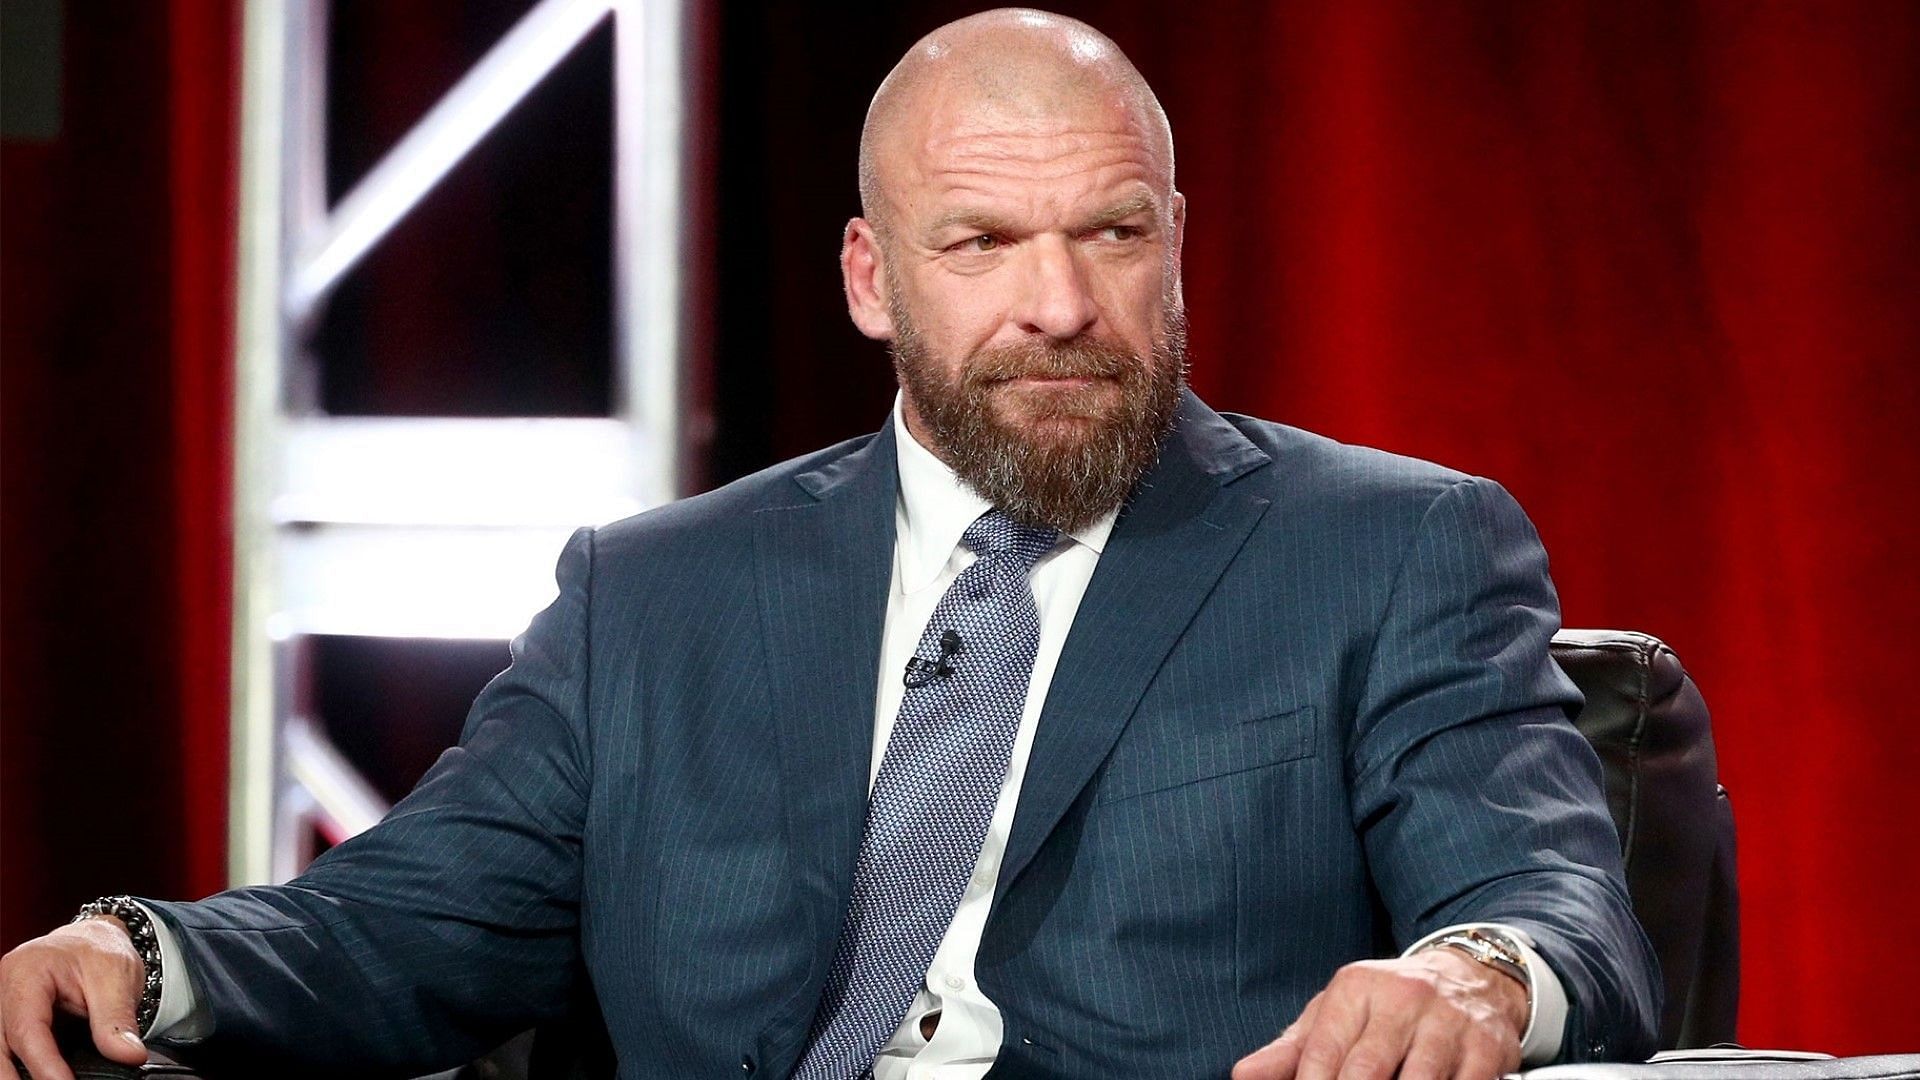 WWE Chief Content Officer Triple H shares his thoughts